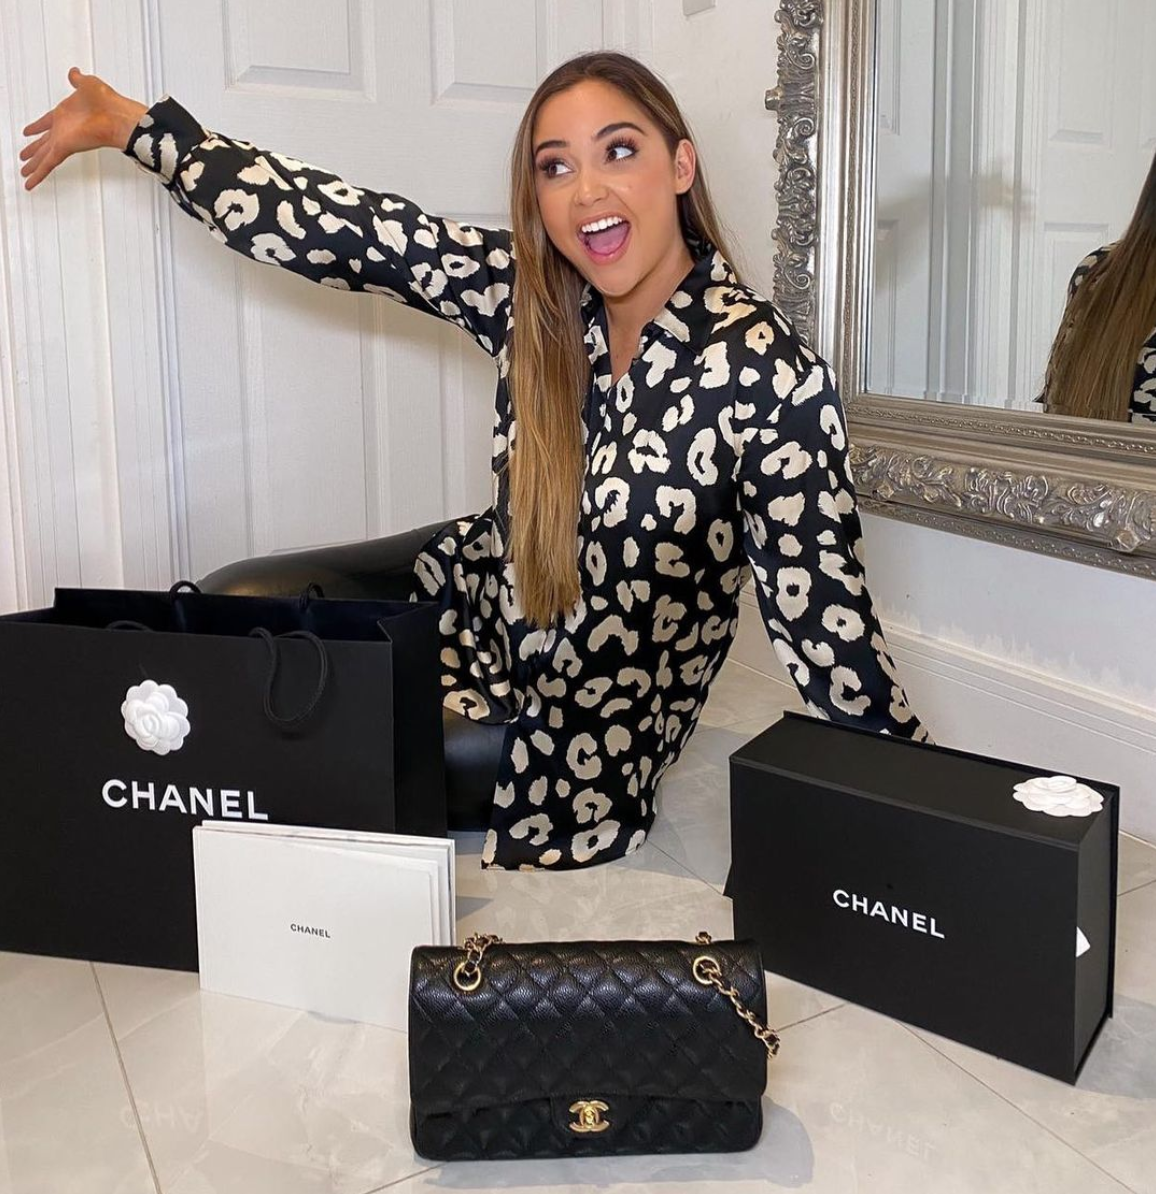 Jacqueline Jossa warns fans about scammers after launching Chanel handbag  giveaway